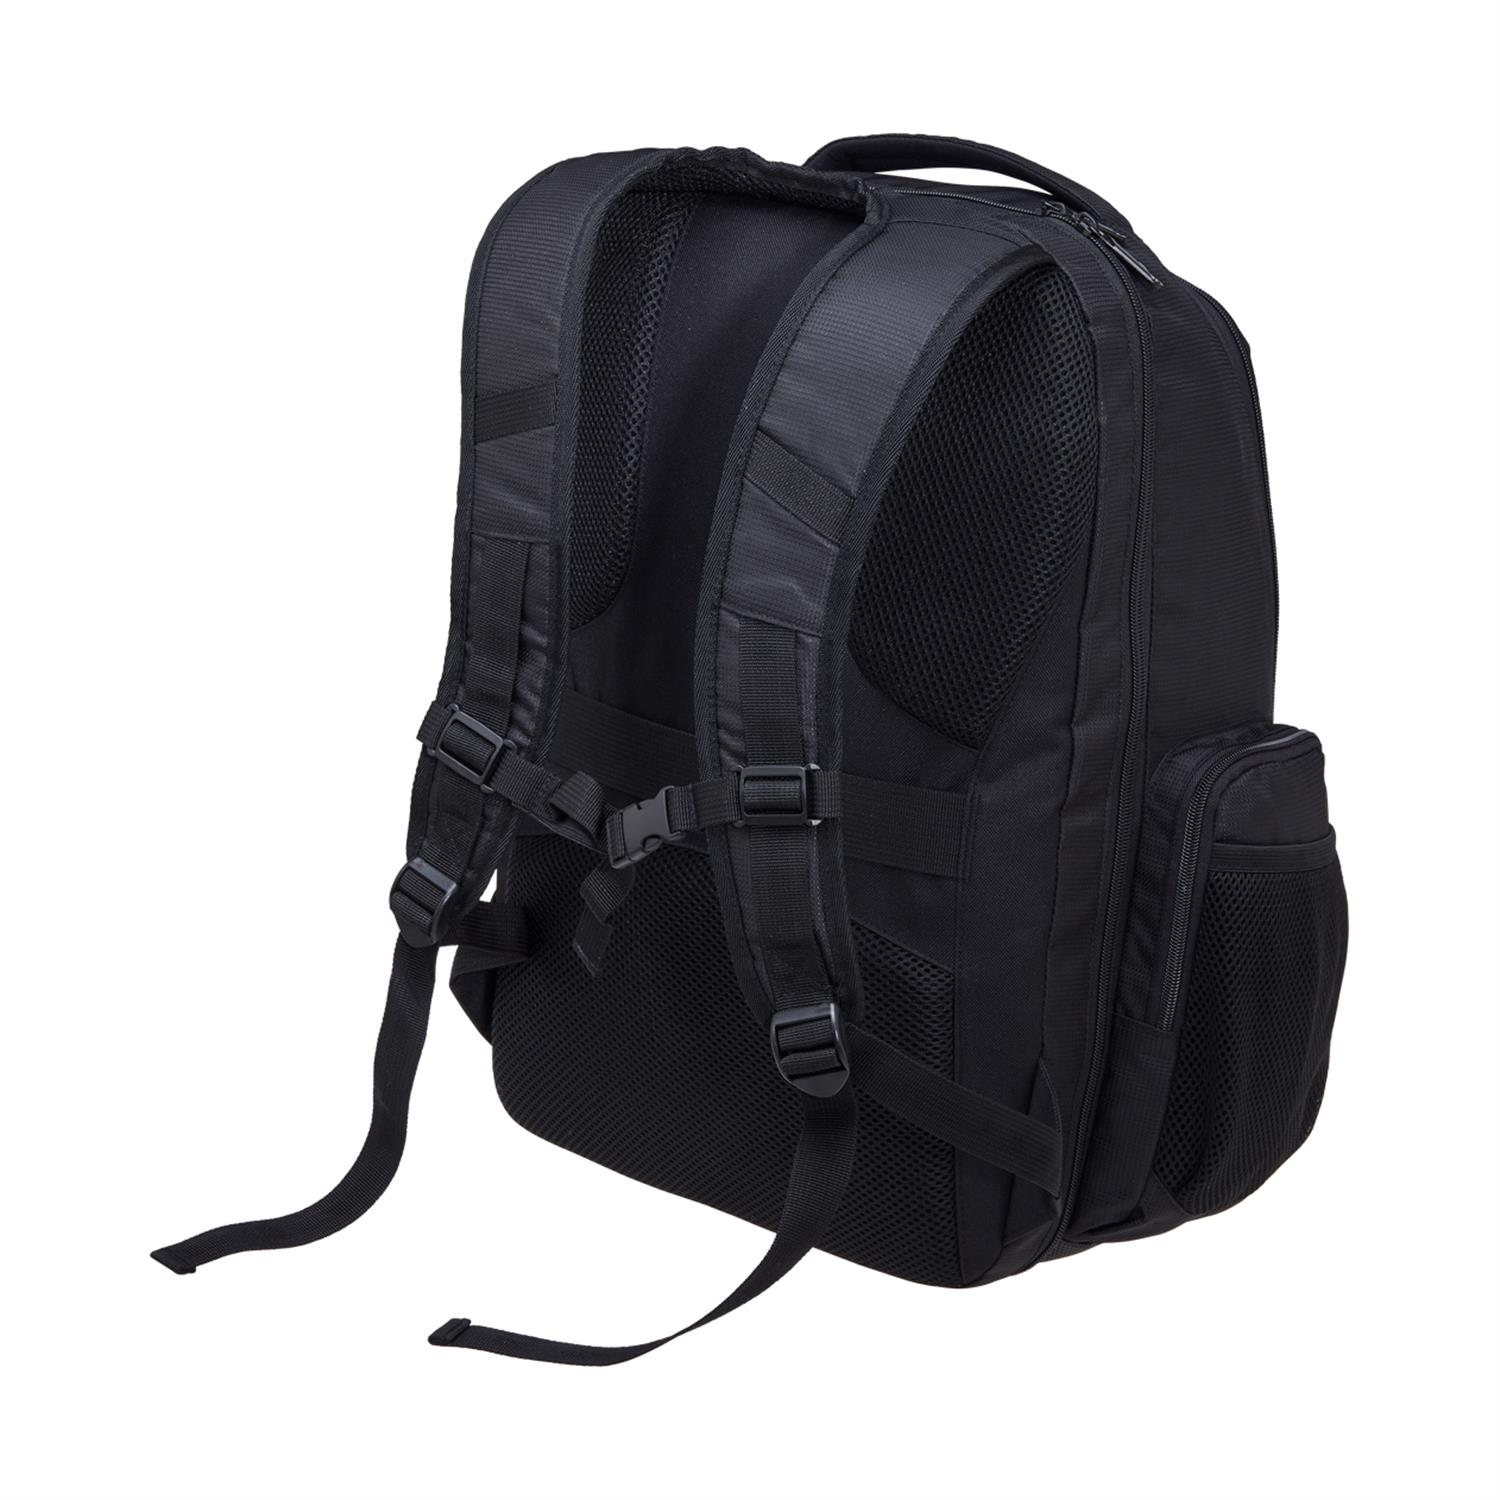 Fortress Backpack | Prime Promotional